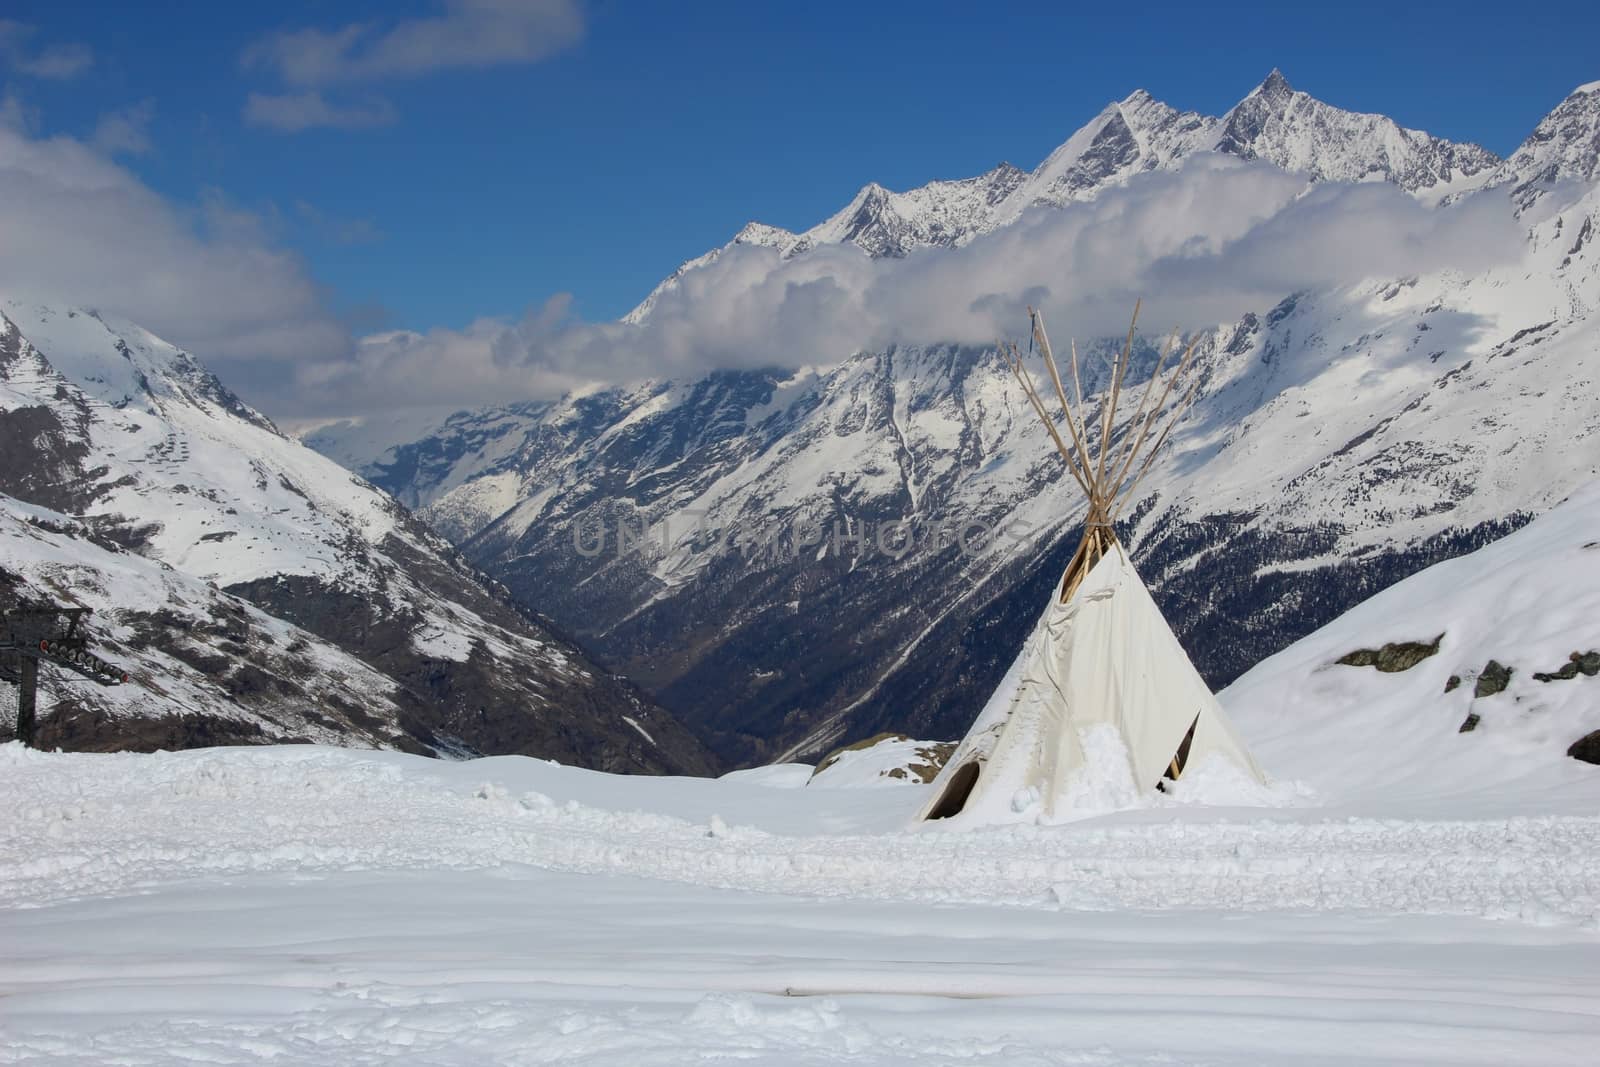 Indian style teepee tent set high up in the Swiss Alps.